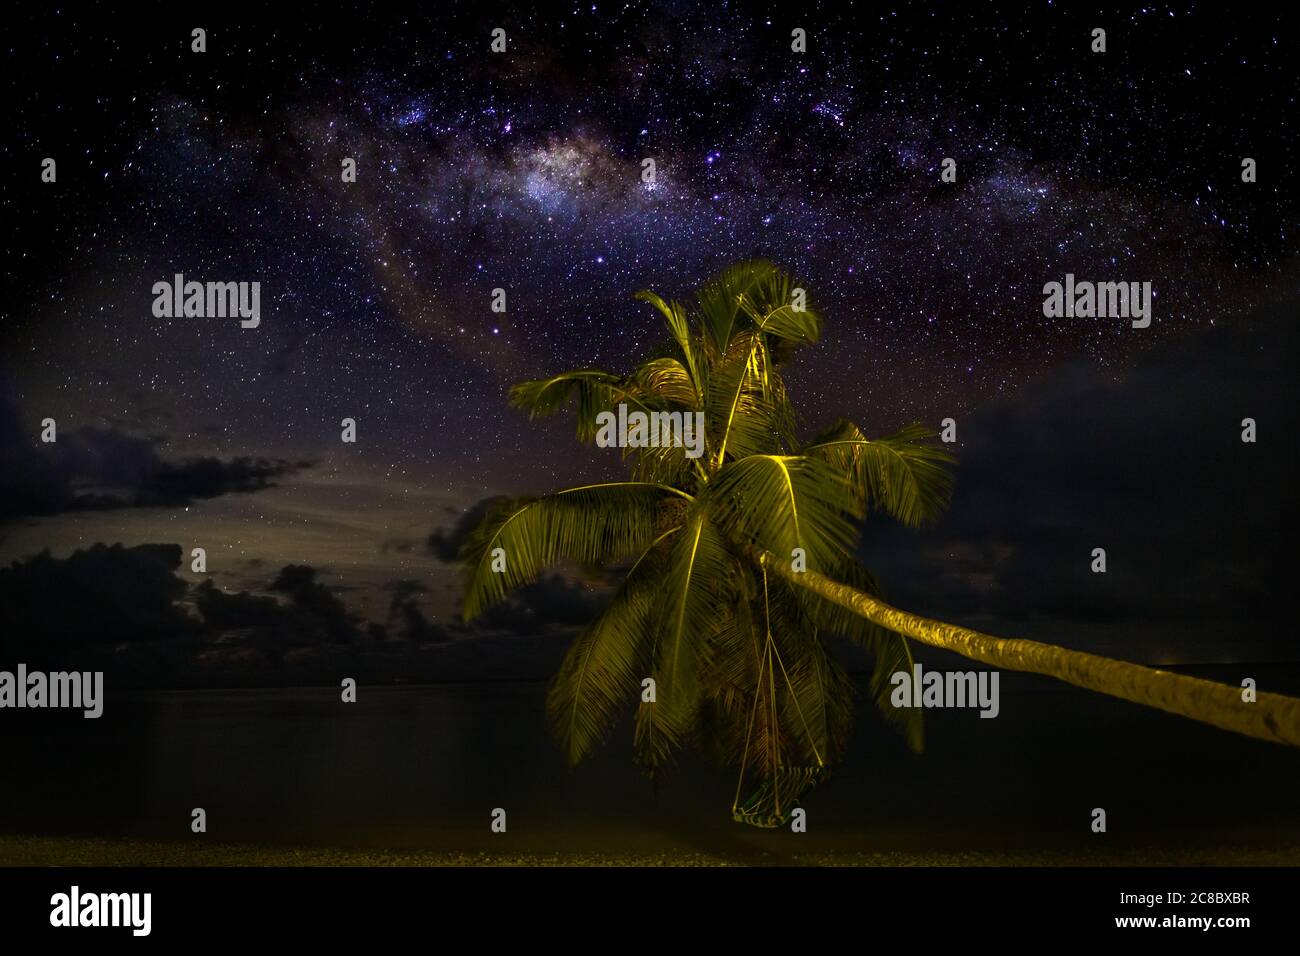 Night shot with palm trees and milky way in background. Palm trees under the stars. Exotic night view, milky way and beautiful night sky Stock Photo